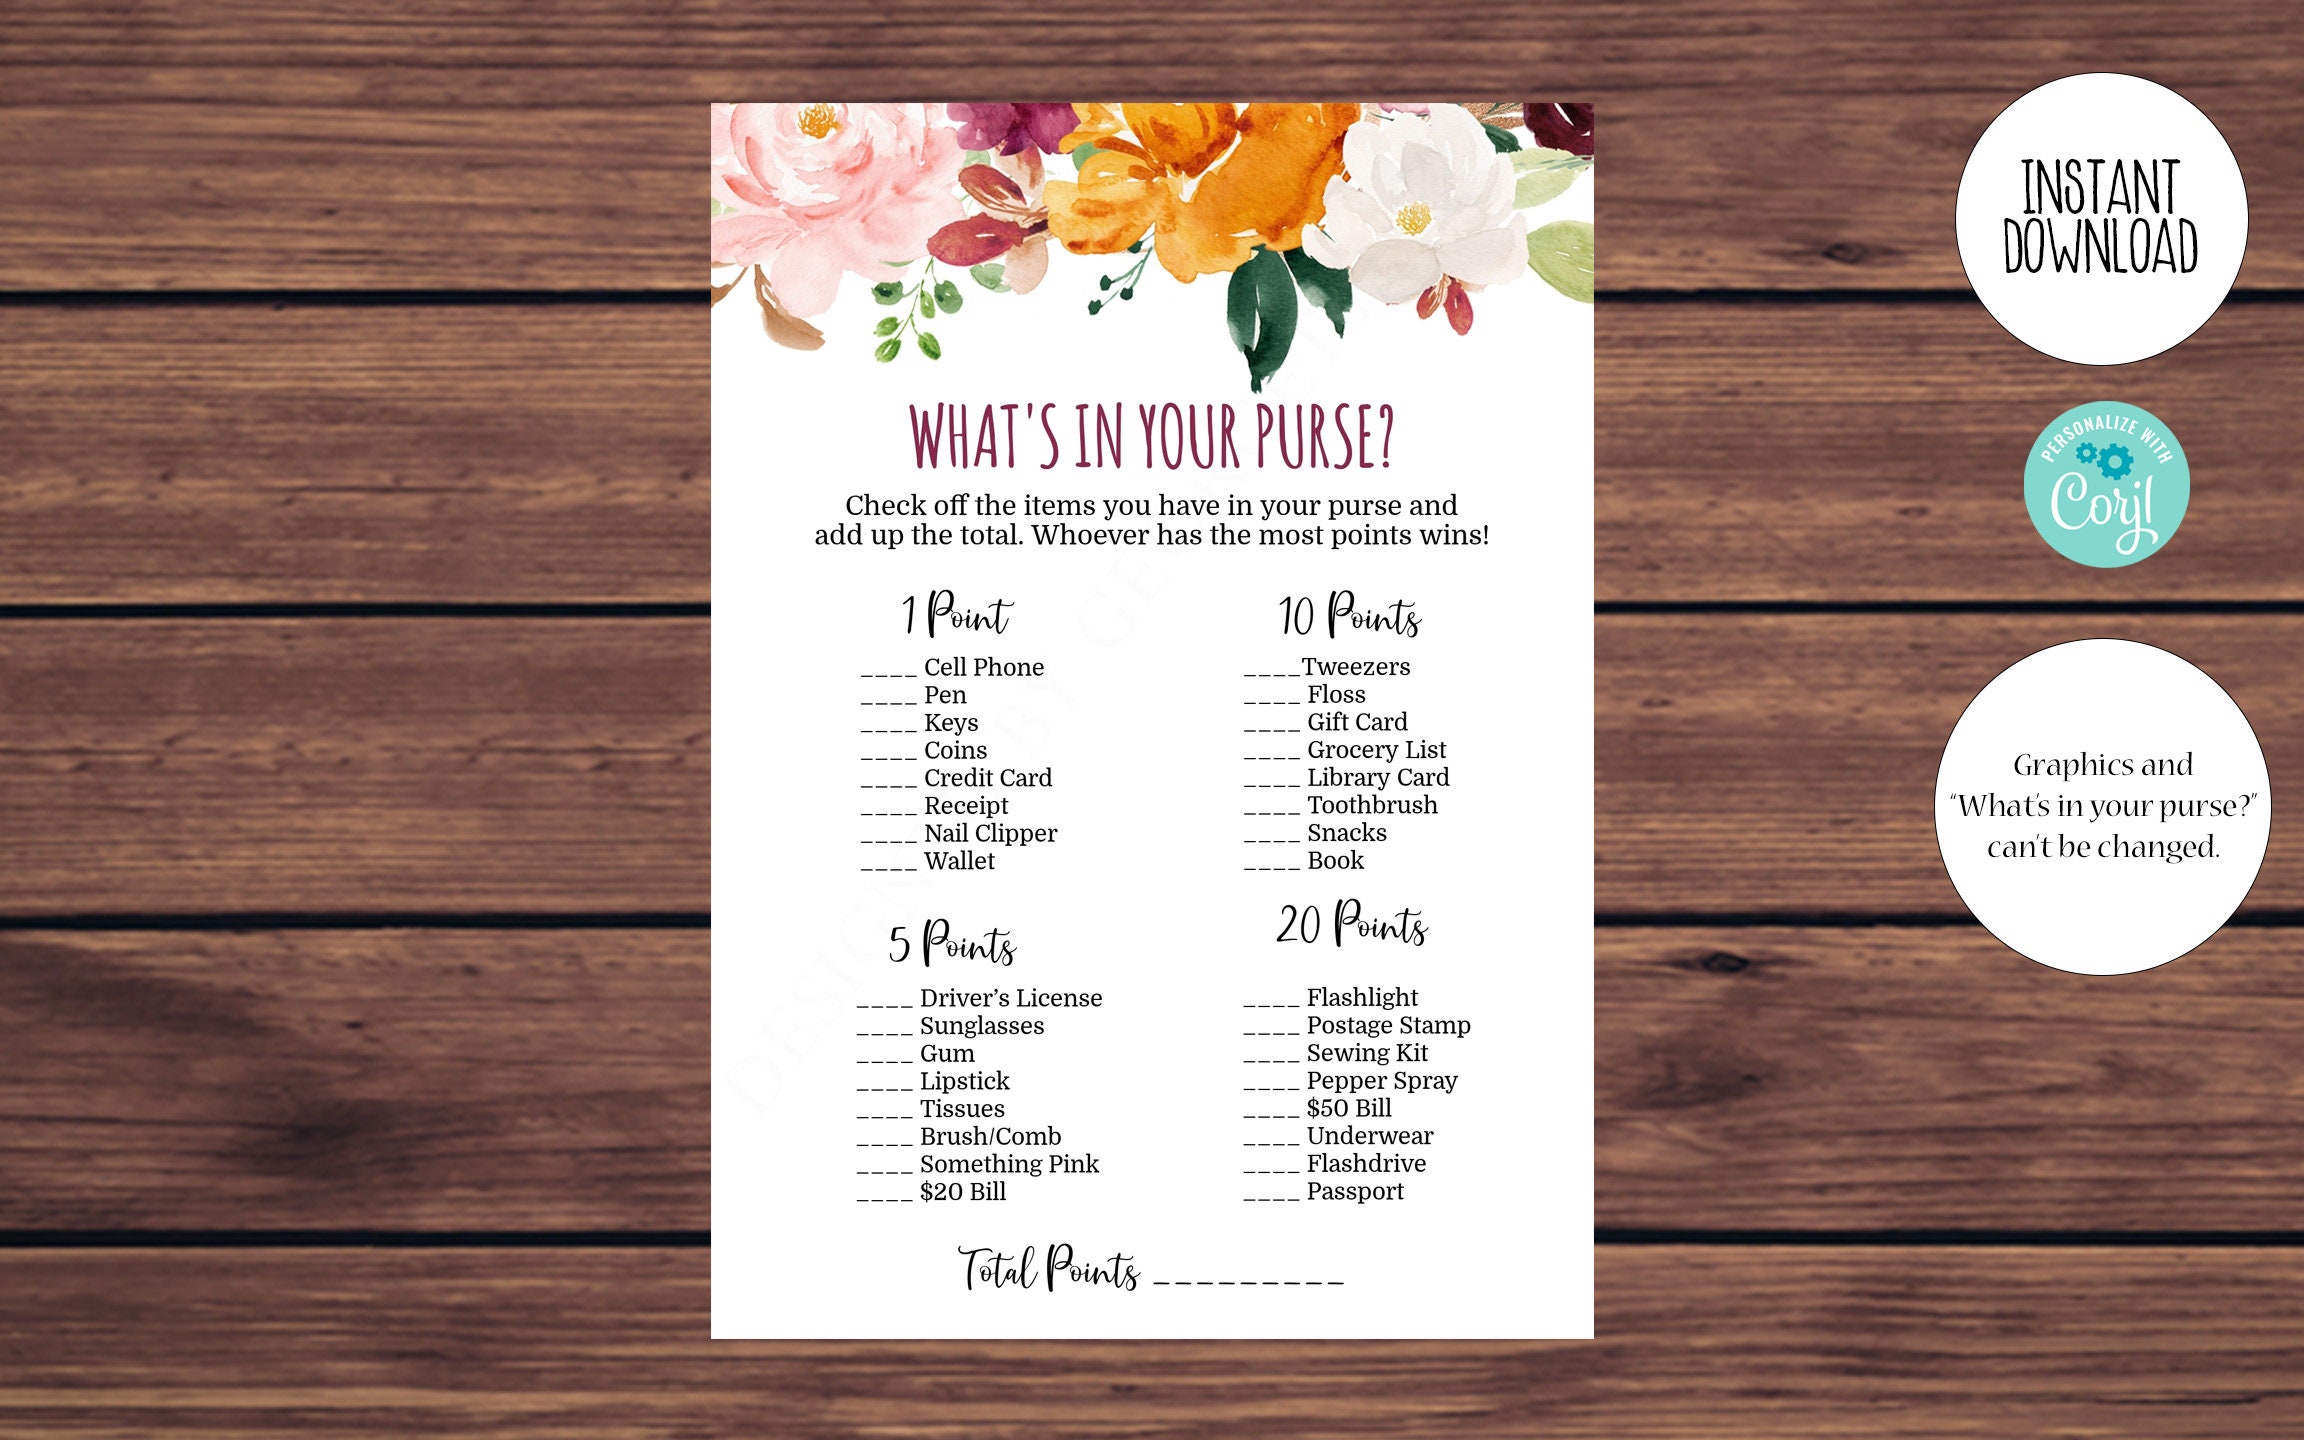 Fall Floral Fall Flowers Rustic Shower What's In Your Purse? Baby Shower or Bridal Shower Game for Fall Shower Instant Digital Download